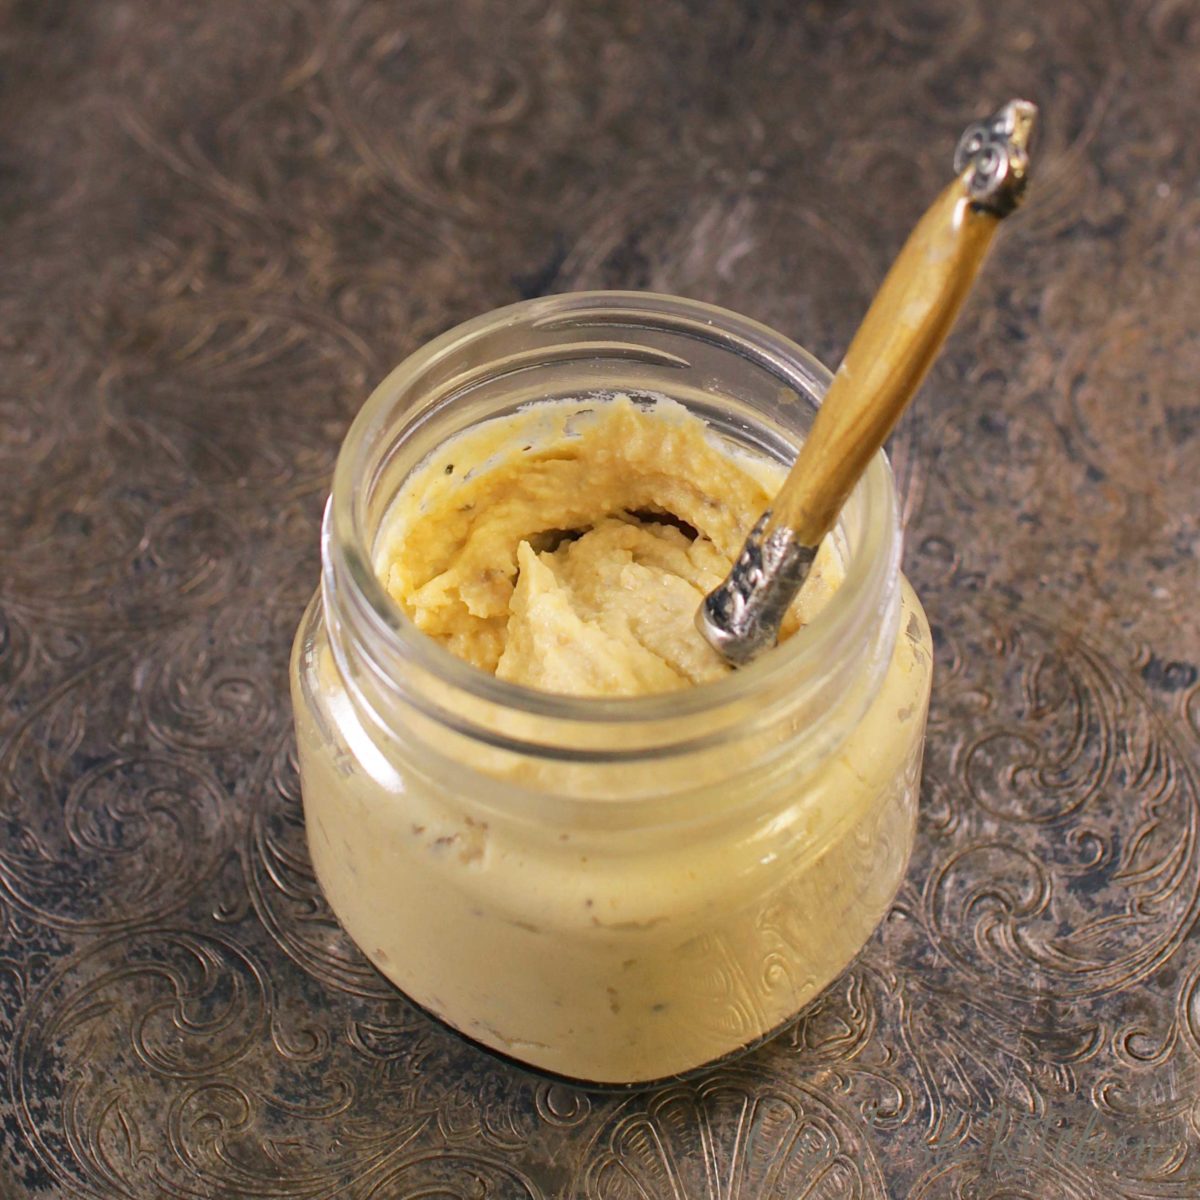 An overhead view of a jar of chickpea hummus with a gold spoon sticking out of the top.